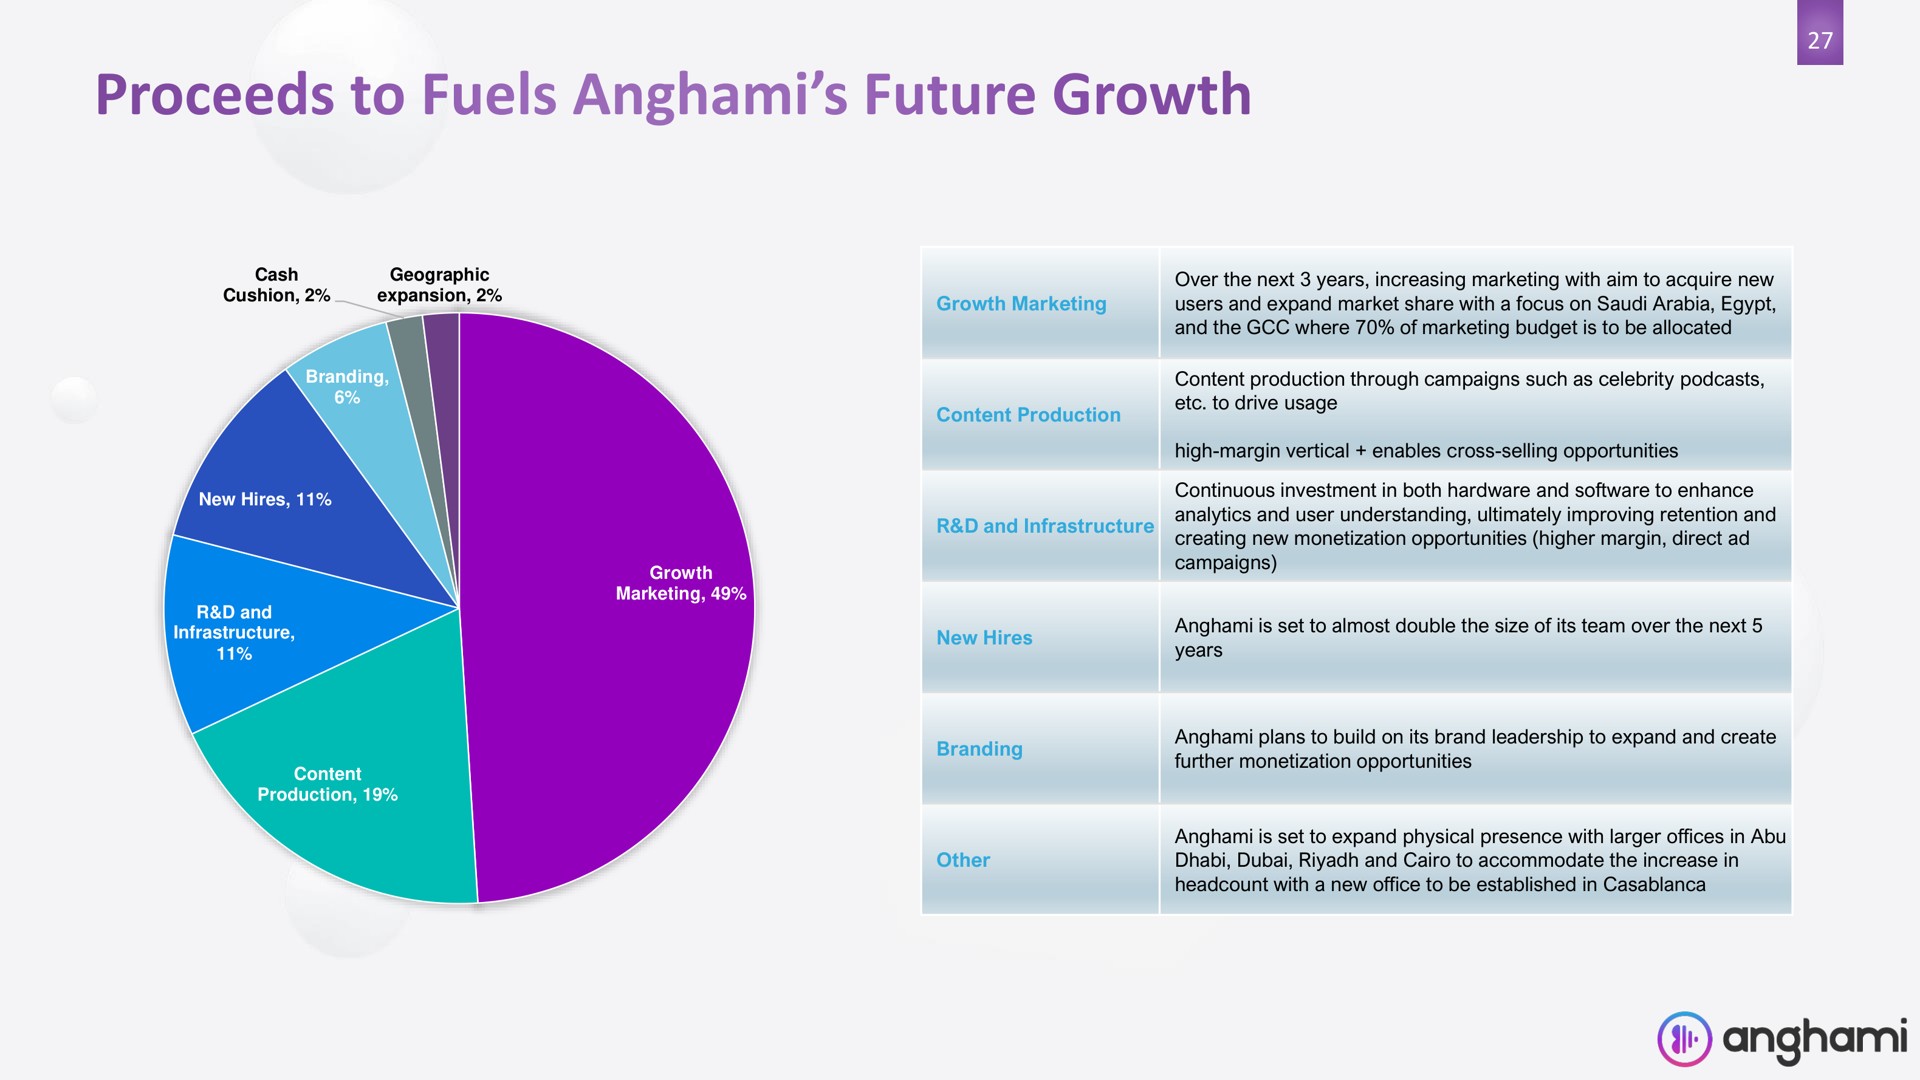 proceeds to fuels future growth | Anghami